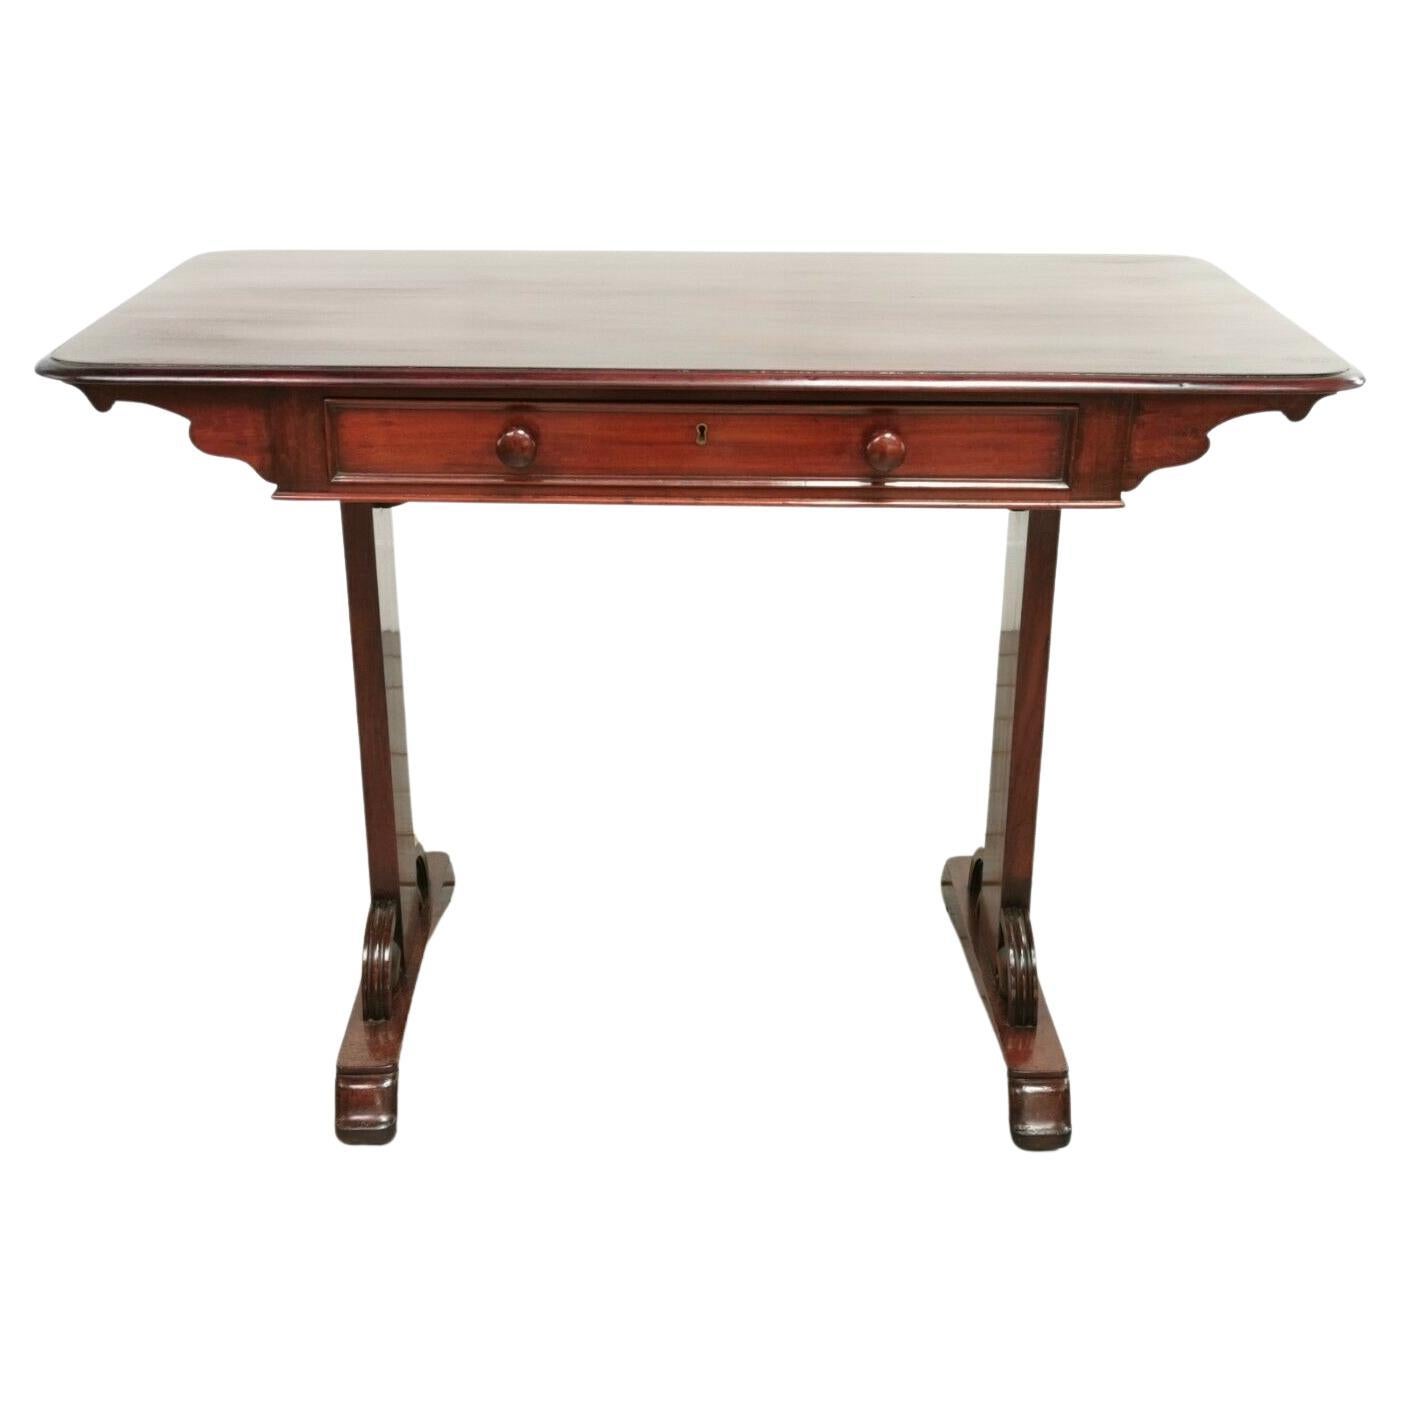 19th Century Victorian Mahogany Writing Desk or Side Table